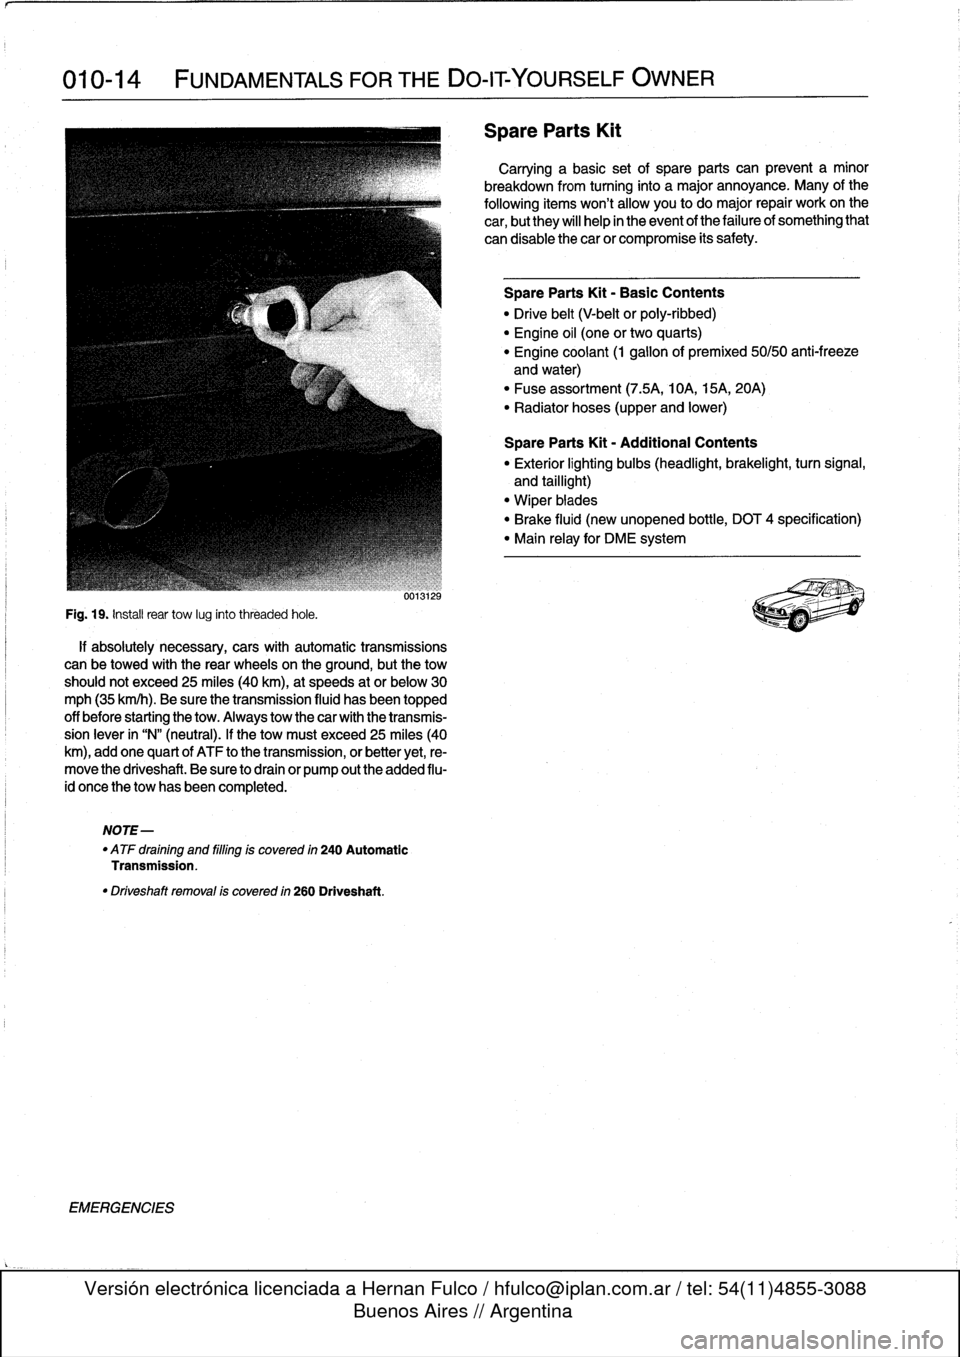 BMW M3 1993 E36 Workshop Manual 
010-14

	

FUNDAMENTALS
FOR
THE
DO-ITYOURSELF
OWNER

Fig
.
19
.
Instaf
rear
tow
lug
into
threaded
hole
.

if
absolutely
necessary,
cars
with
automatic
transmissions
can
be
towed
with
the
rear
wheels
